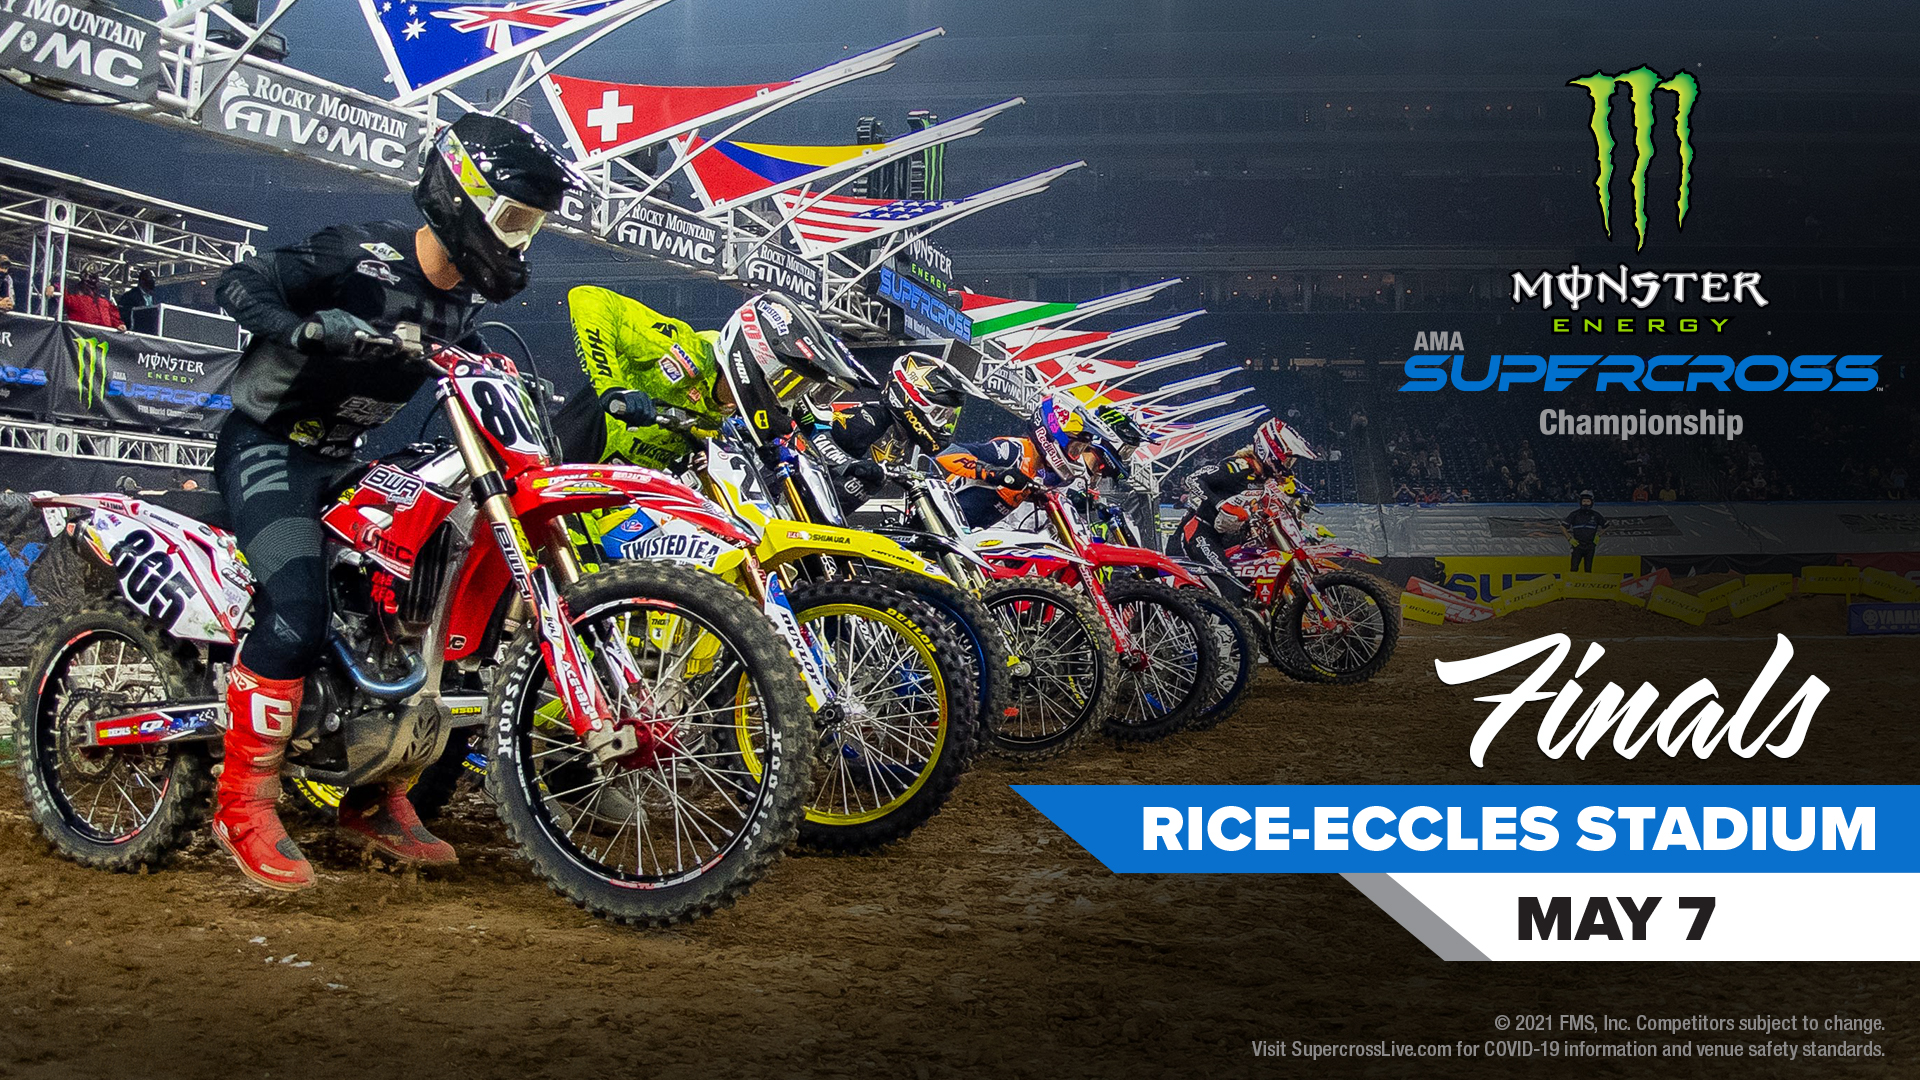 Monster Energy Supercross 2022 Season on Sale Today for Salt Lake City Finals on May 7 at Rice-Eccles Stadium – Stadium & Arena Event Services